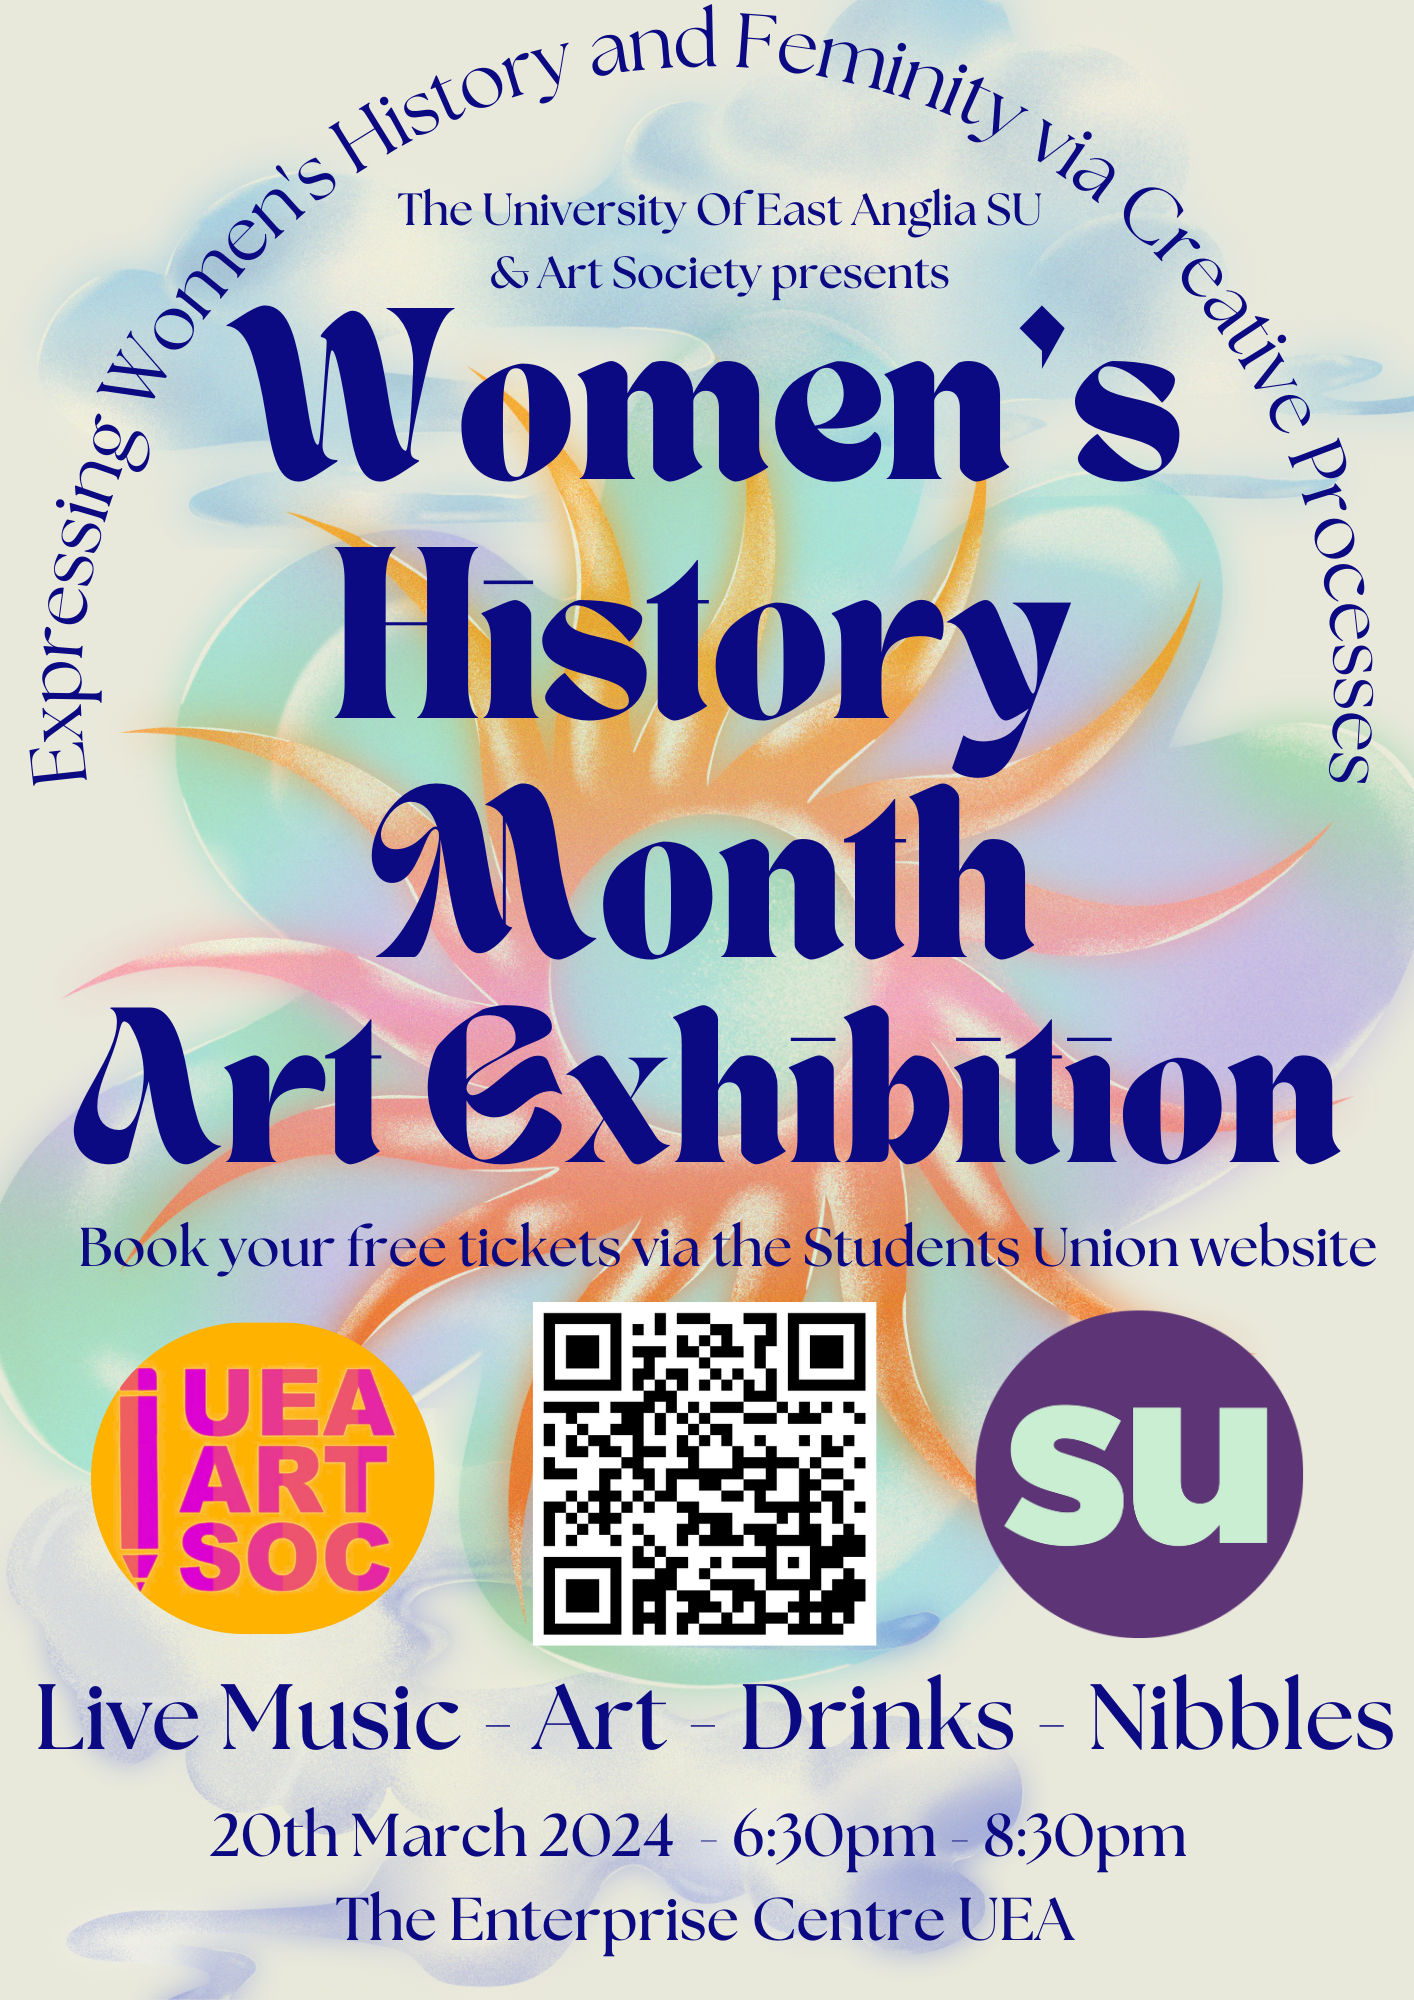 Womens History Month Art Exhibition - Wednesday 20th March @ the Enterprise Centre